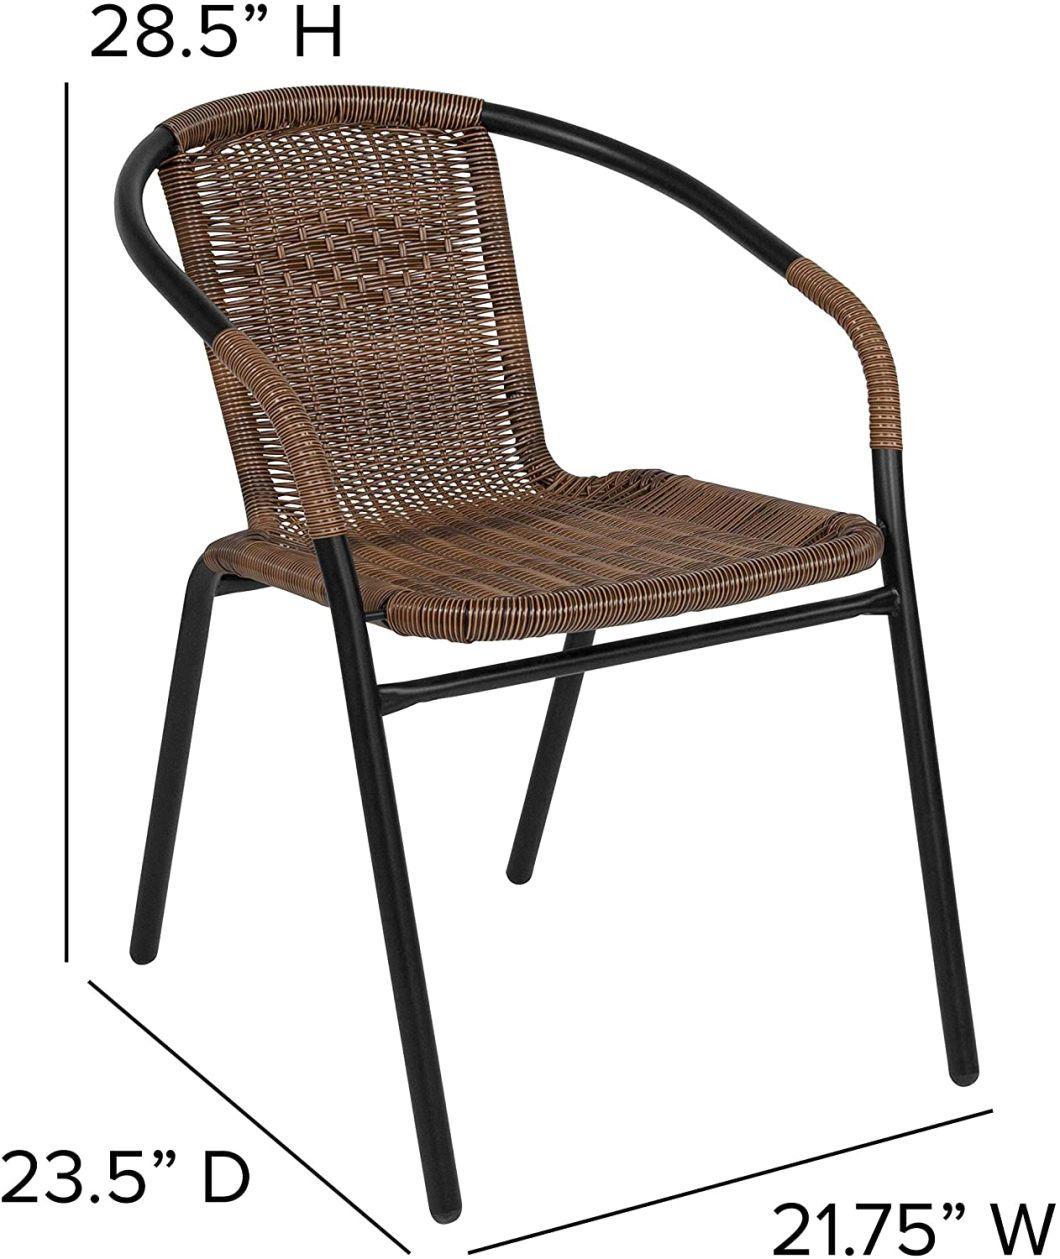 Wholesale Outdoor Garden Patio Chairs Leisure Chair Office Chairs Rattan/Wicker Seating Modern Home Furniture Hotel Restaurant Stackable Webbing Chair